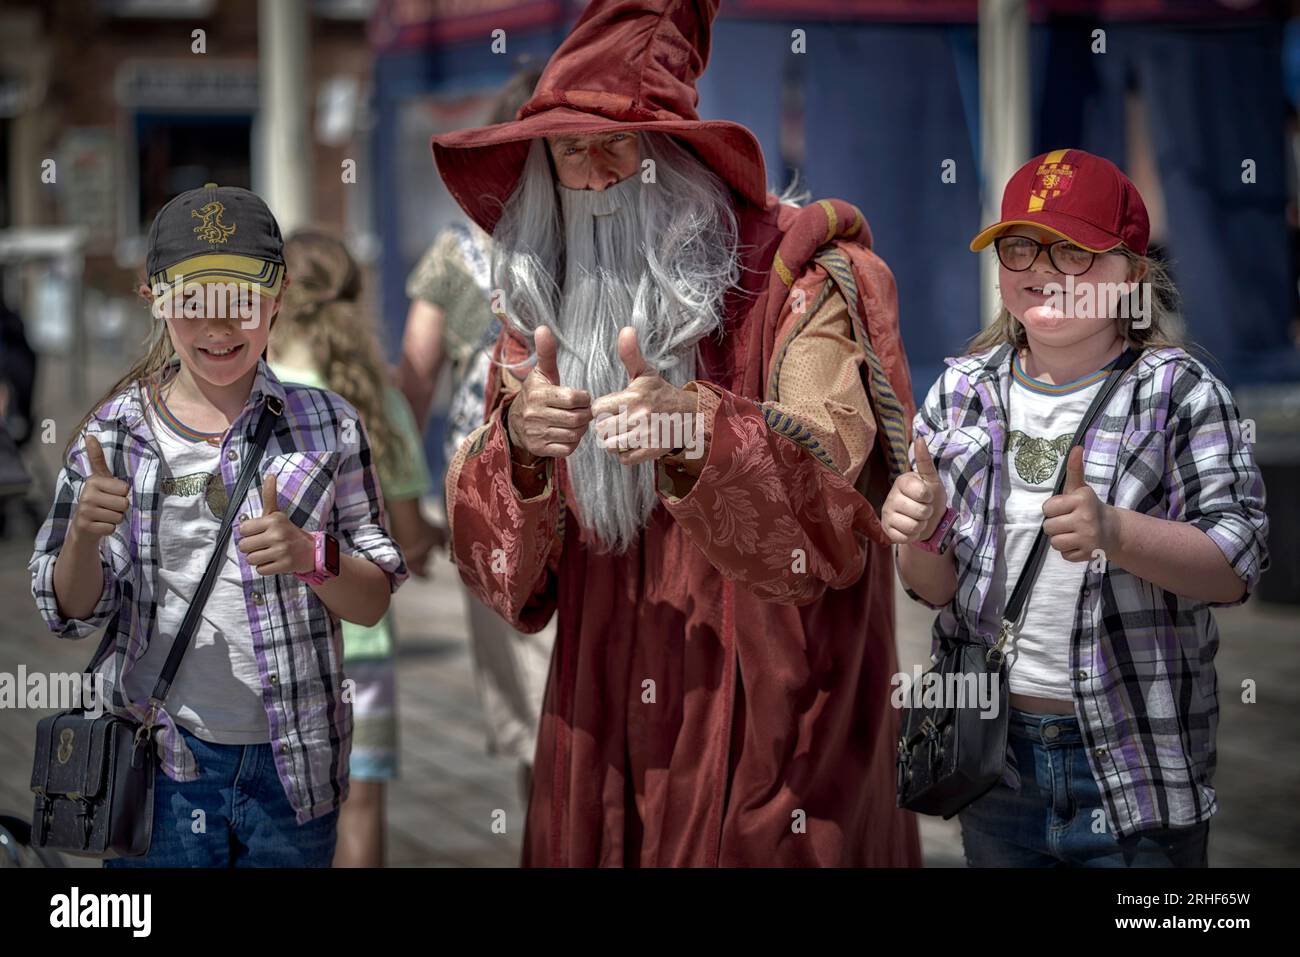 Dumbledore actor from the Harry Potter series entertaining children at Stratford upon Avon, England UK Stock Photo